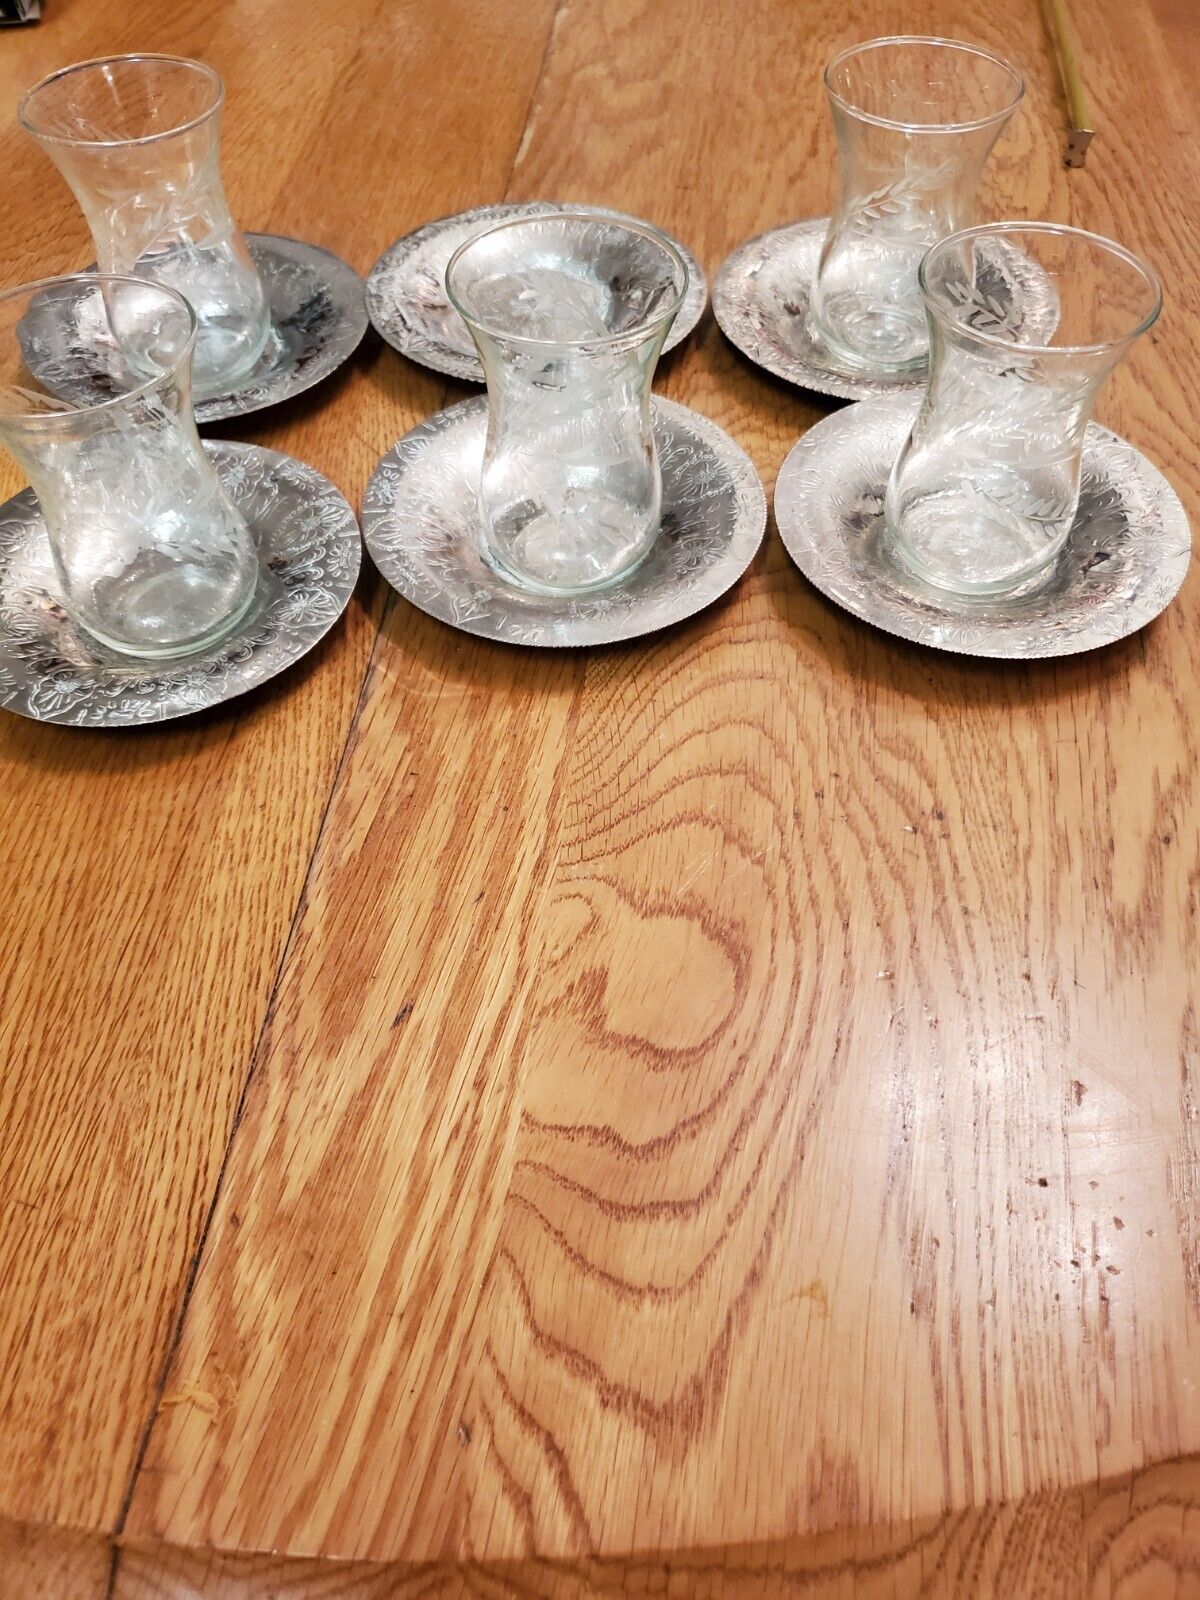 5 vintage turkish etched glass cups with 6 nonferrous metal saucers